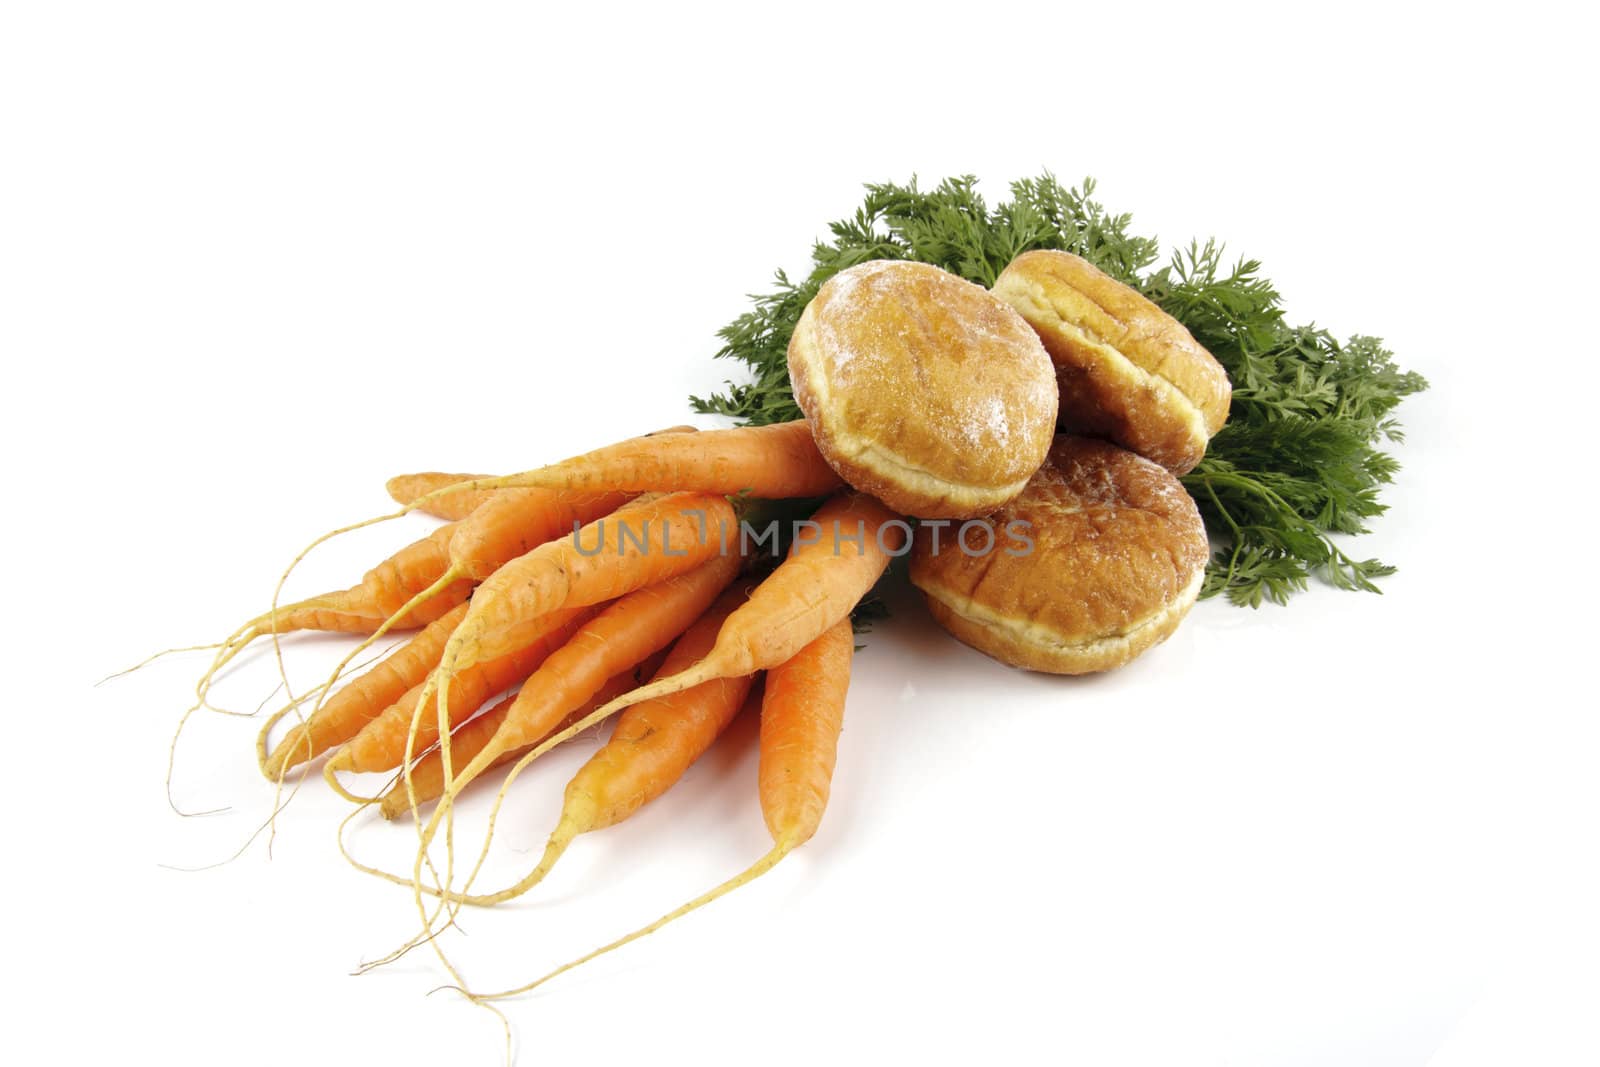 Contradiction between healthy food and junk food using bunch of carrots and doughnut on a reflective white background 